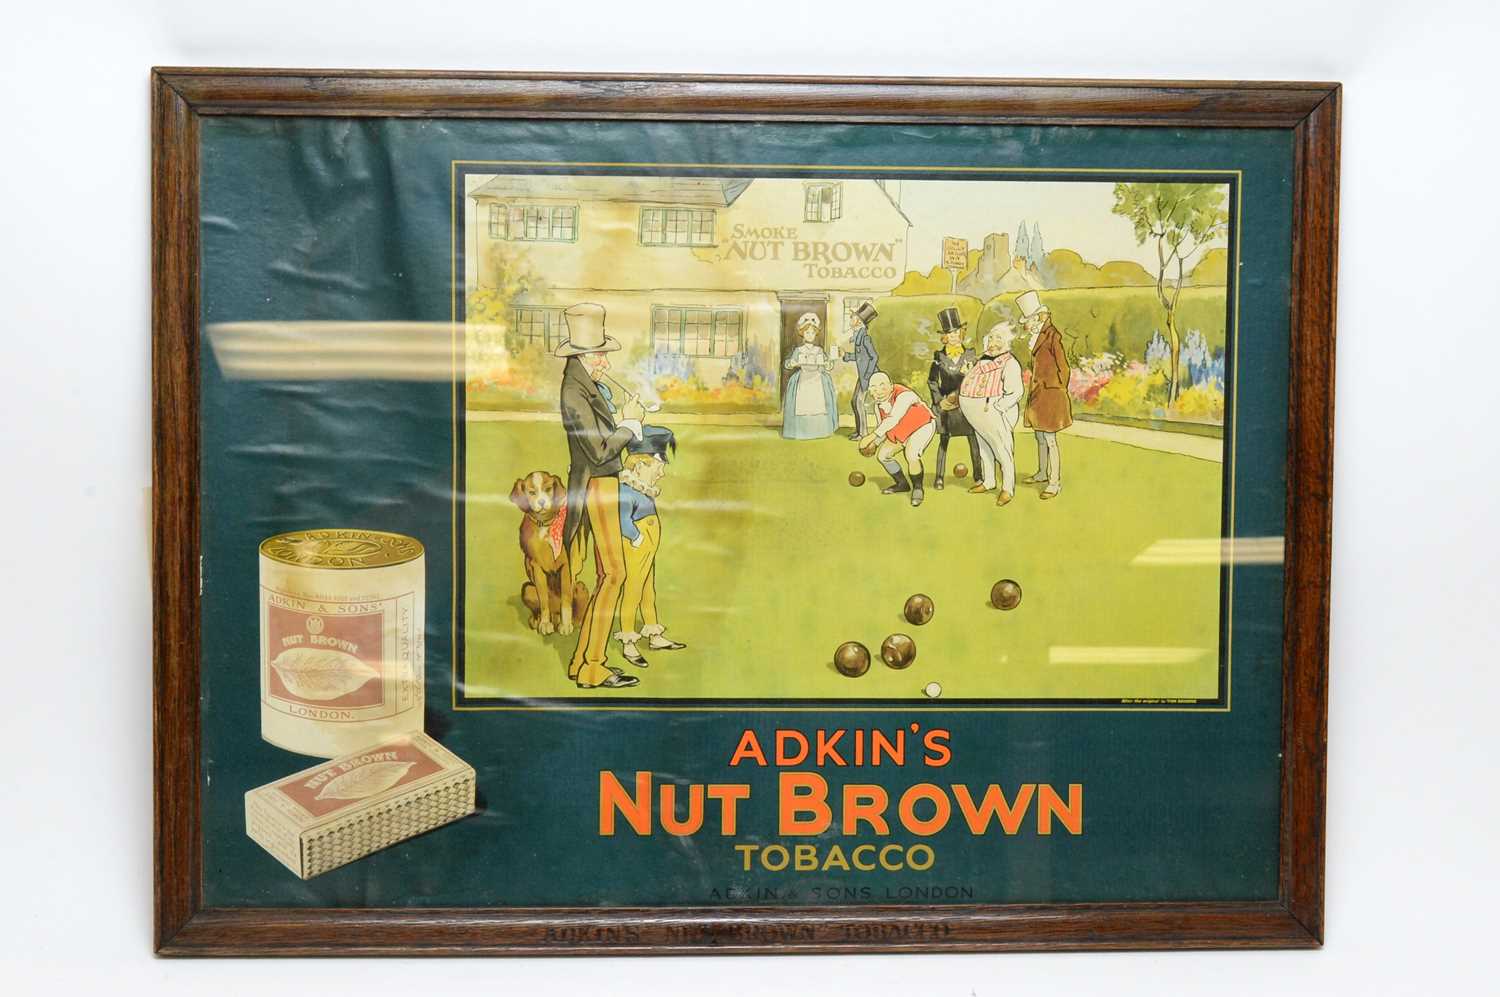 An early 20th Century advertising sign for Adkins Nut Brown Tobacco